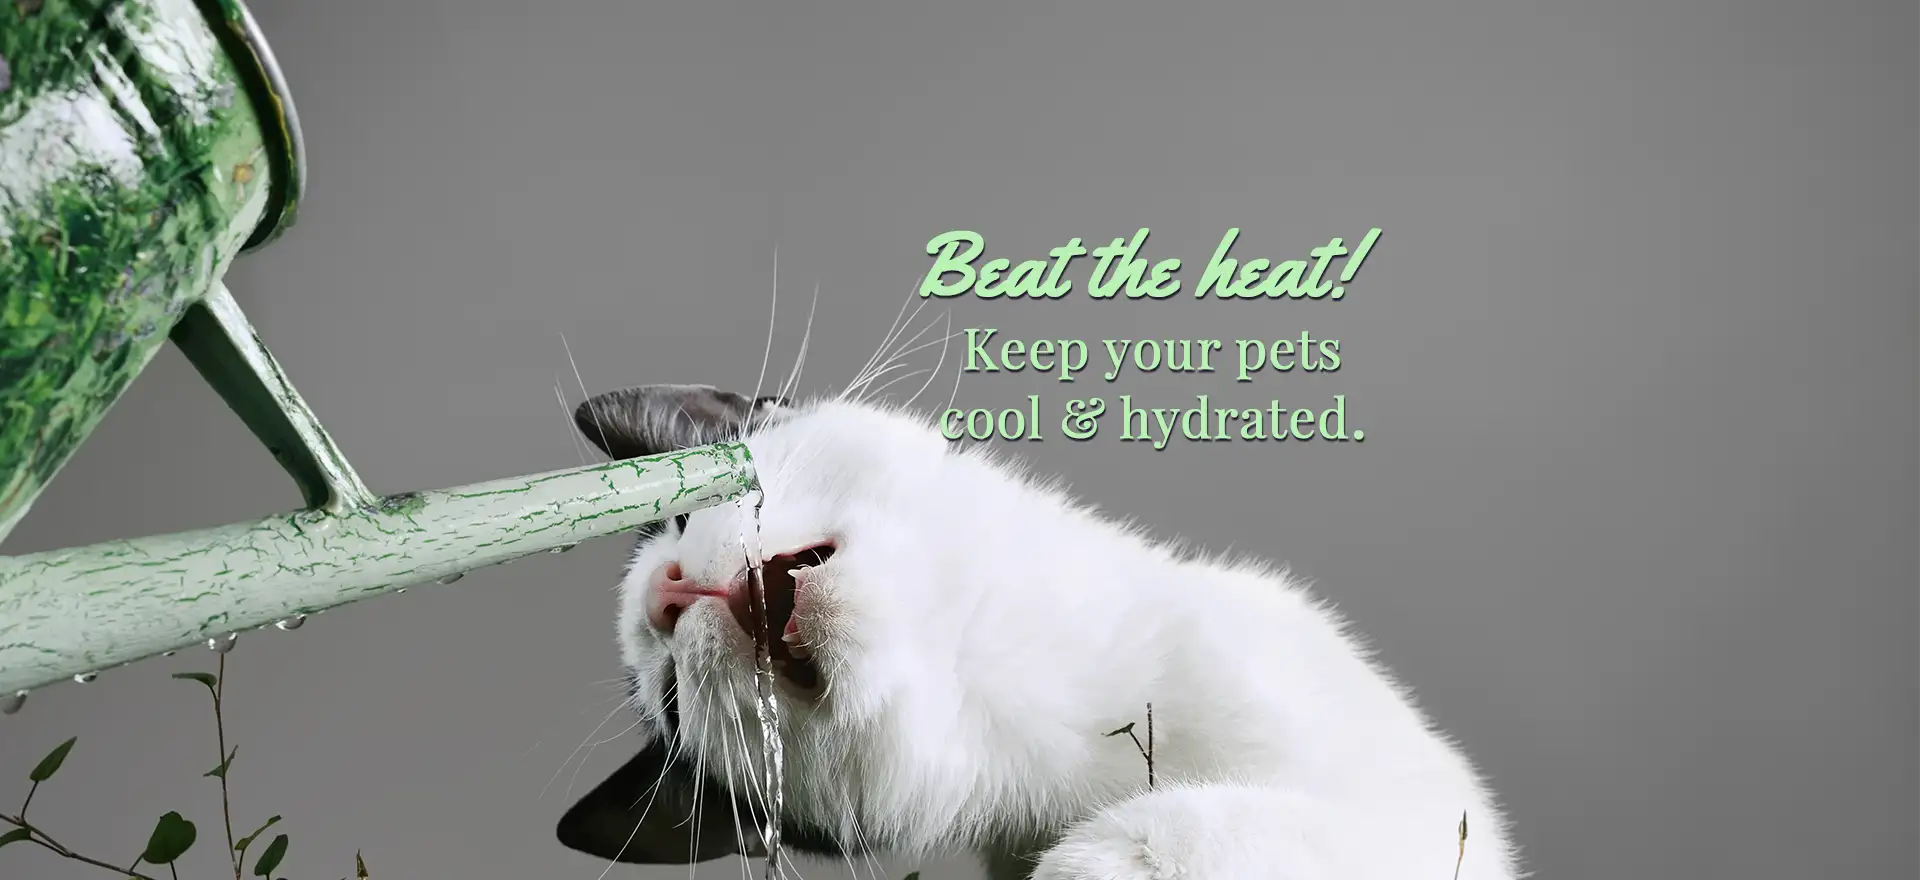 Beat the heat! Keep your pets cool & hydreated!